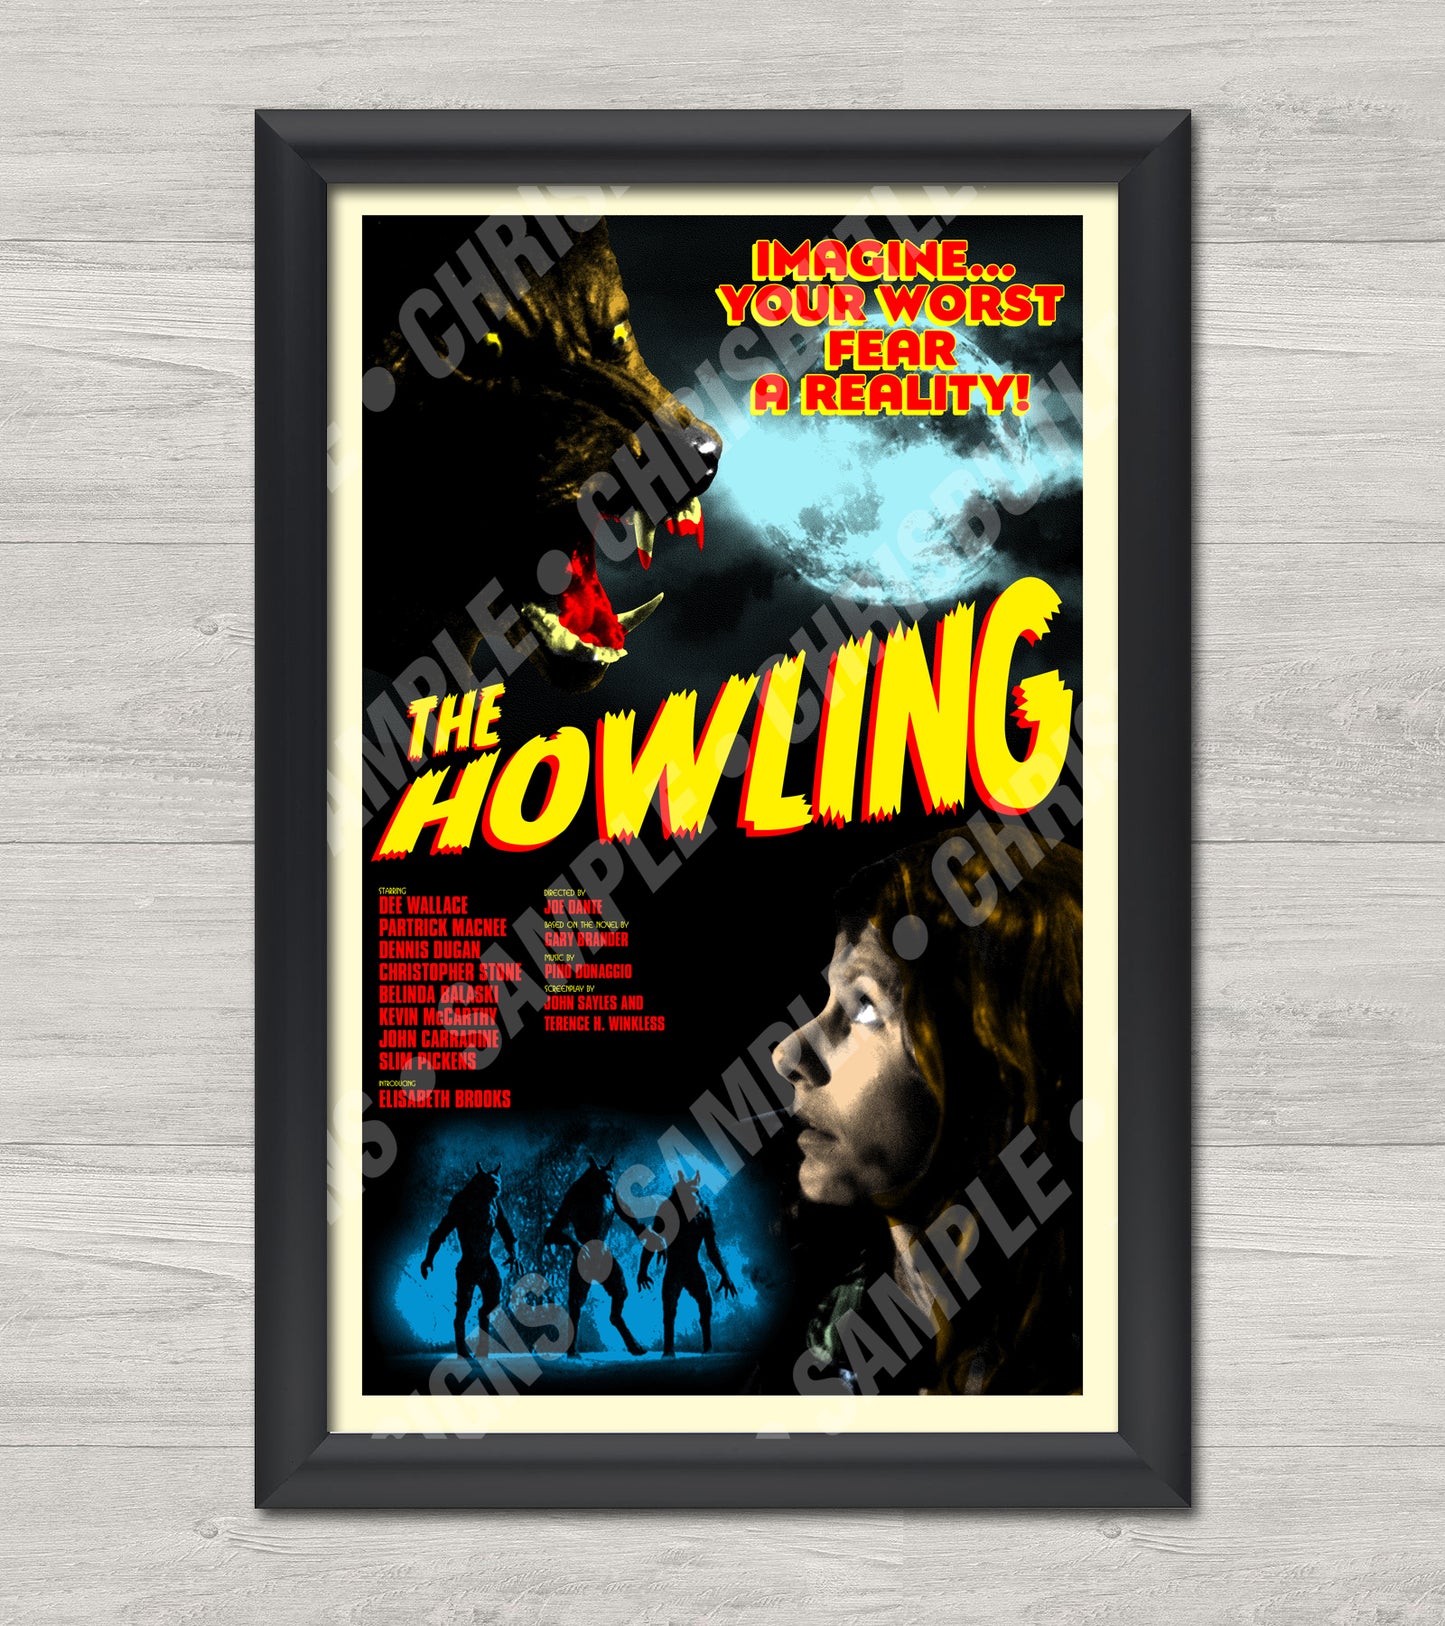 The Howling (Classic Series) 11x17 Alternative Movie Poster